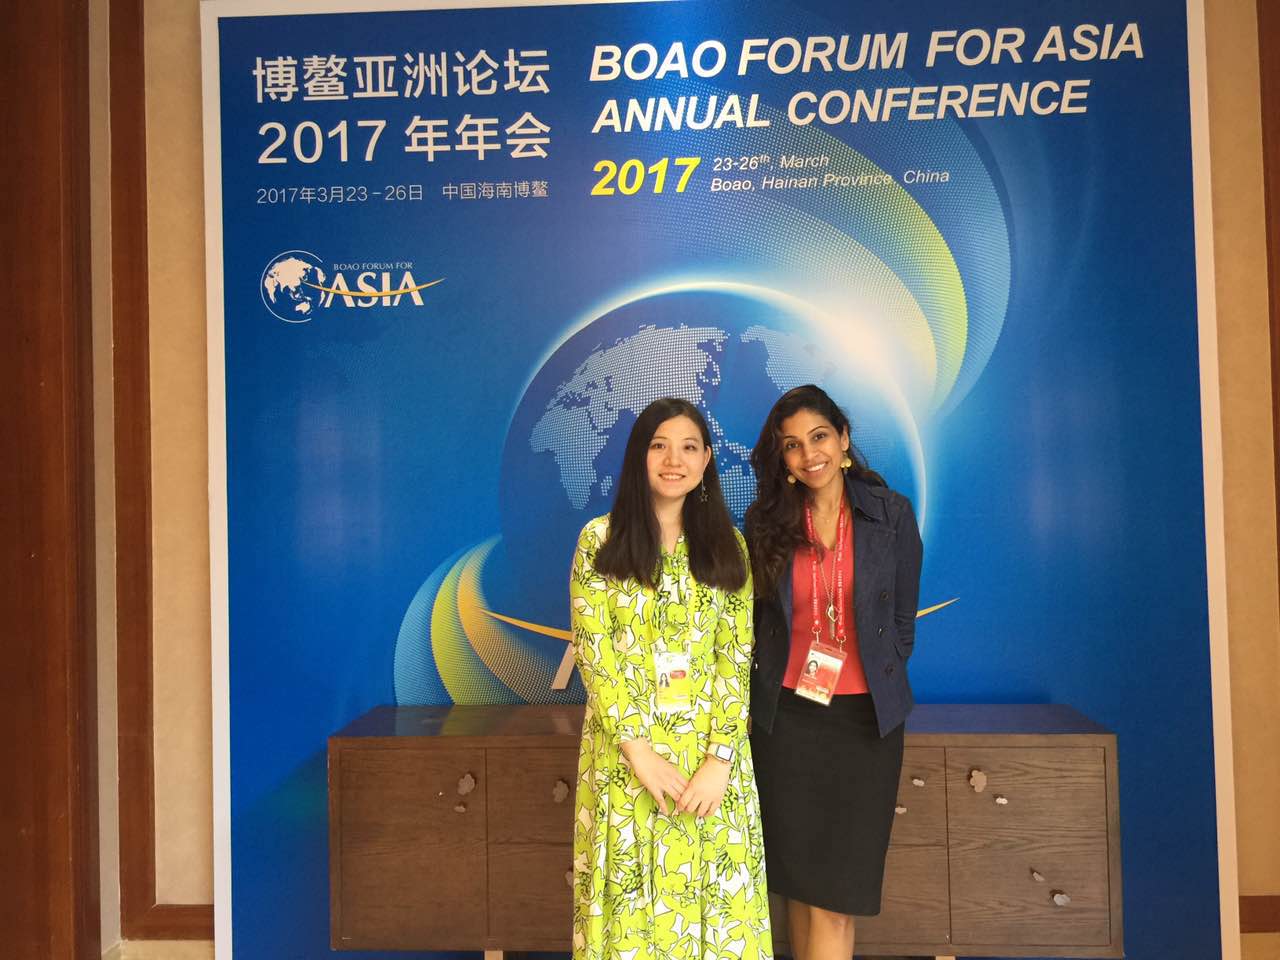 Anisha Singh, founder & CEO of India's website mydala.com during an interview with CRI's Lu Chang at the 2017 Bo'ao Forum for Asia on Friday, March 24, 2017. [Photo: China Plus/Lu Chang]